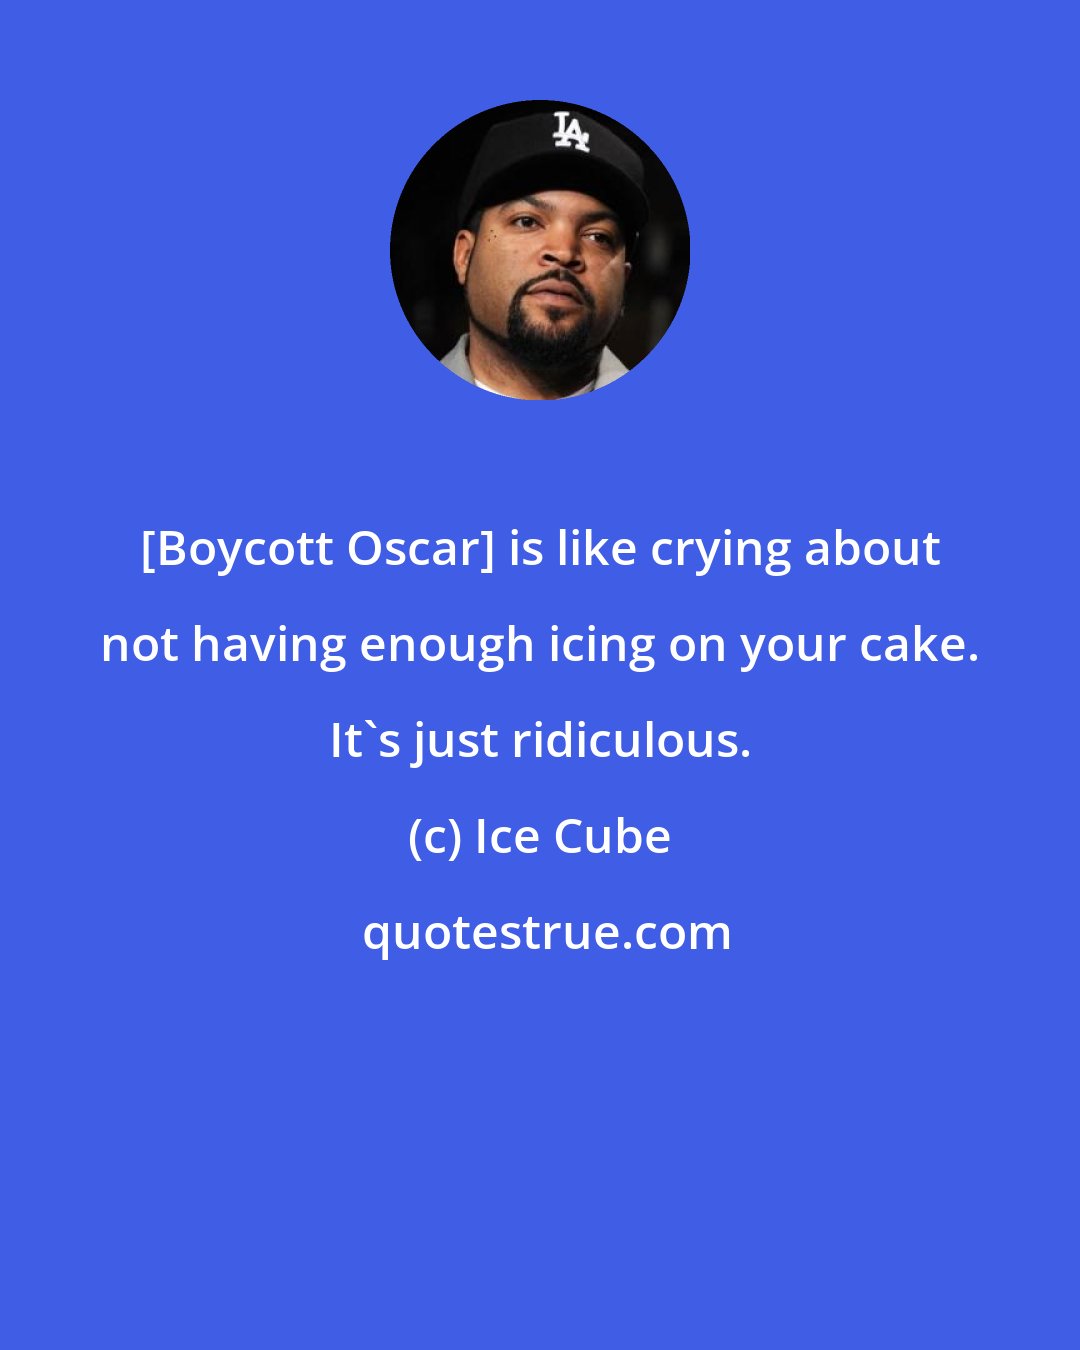 Ice Cube: [Boycott Oscar] is like crying about not having enough icing on your cake. It's just ridiculous.